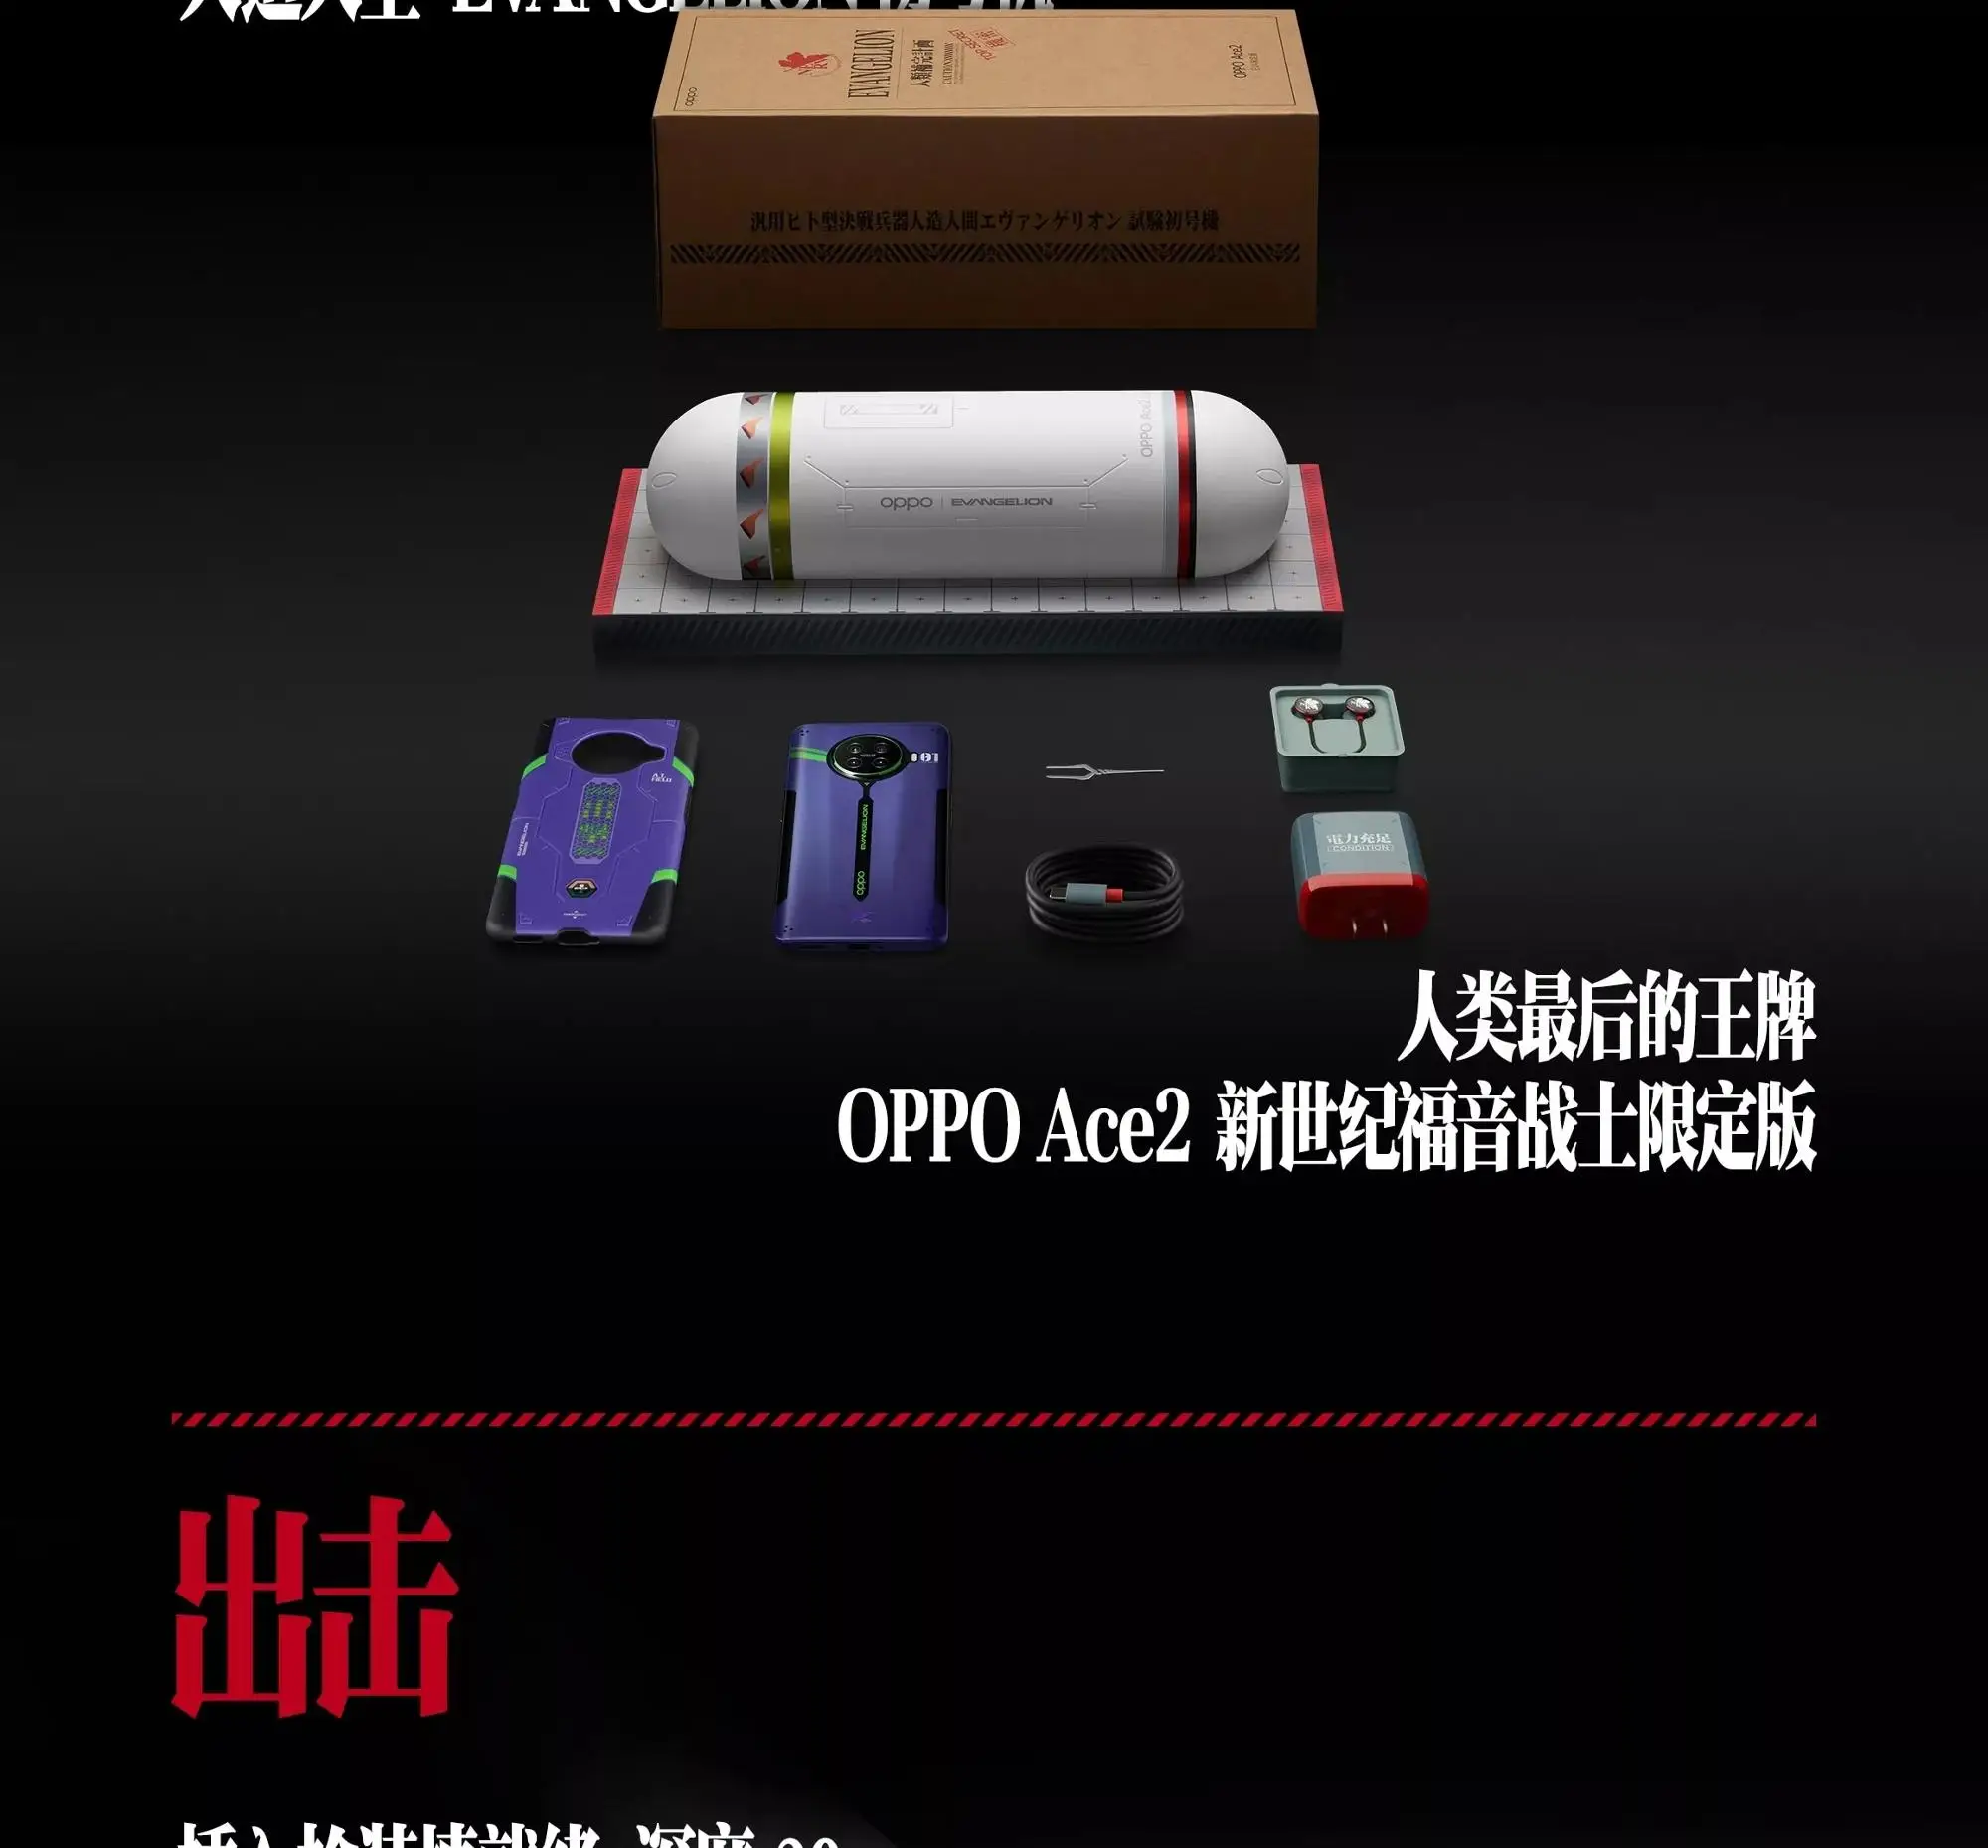 Oppo Reno Ace 2 EVANGELION 5G Mobile Phone Snapdragon 865 6.55 inches AMOLED 8GB 256GB ROM 40W AirVOOC 65W SuperVOOCSmart phone